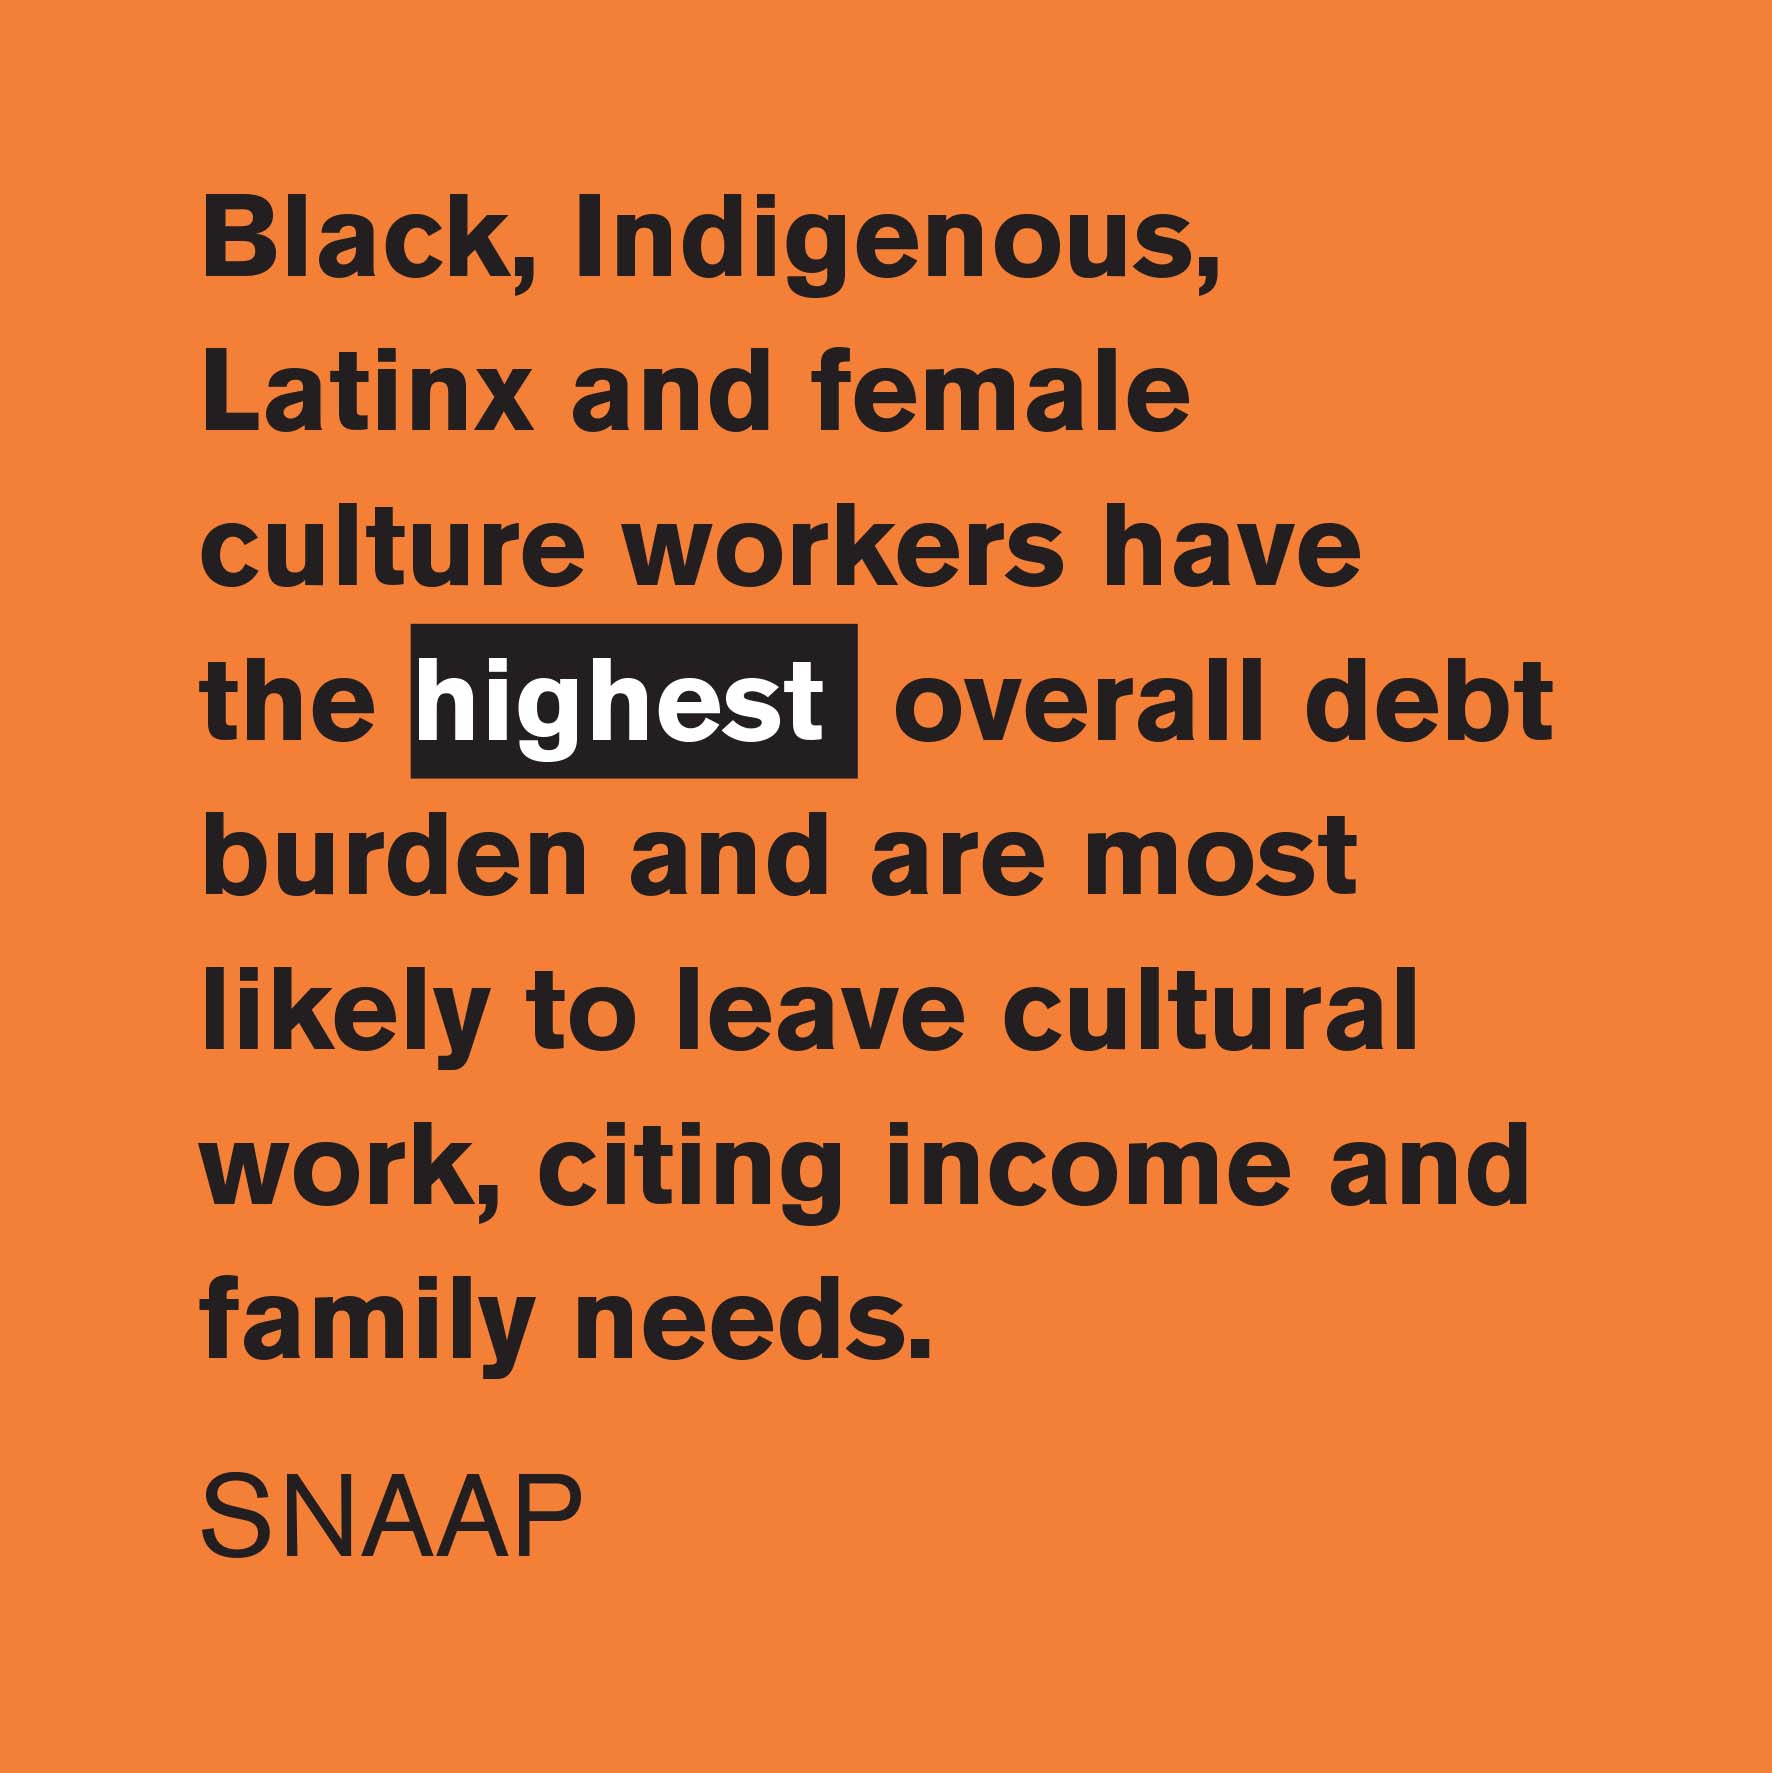 Black, Indigenous, Latinx and female culture workers have the highest overall debt burden and are most likely to leave cultural work, citing income and family needs (SNAAP)